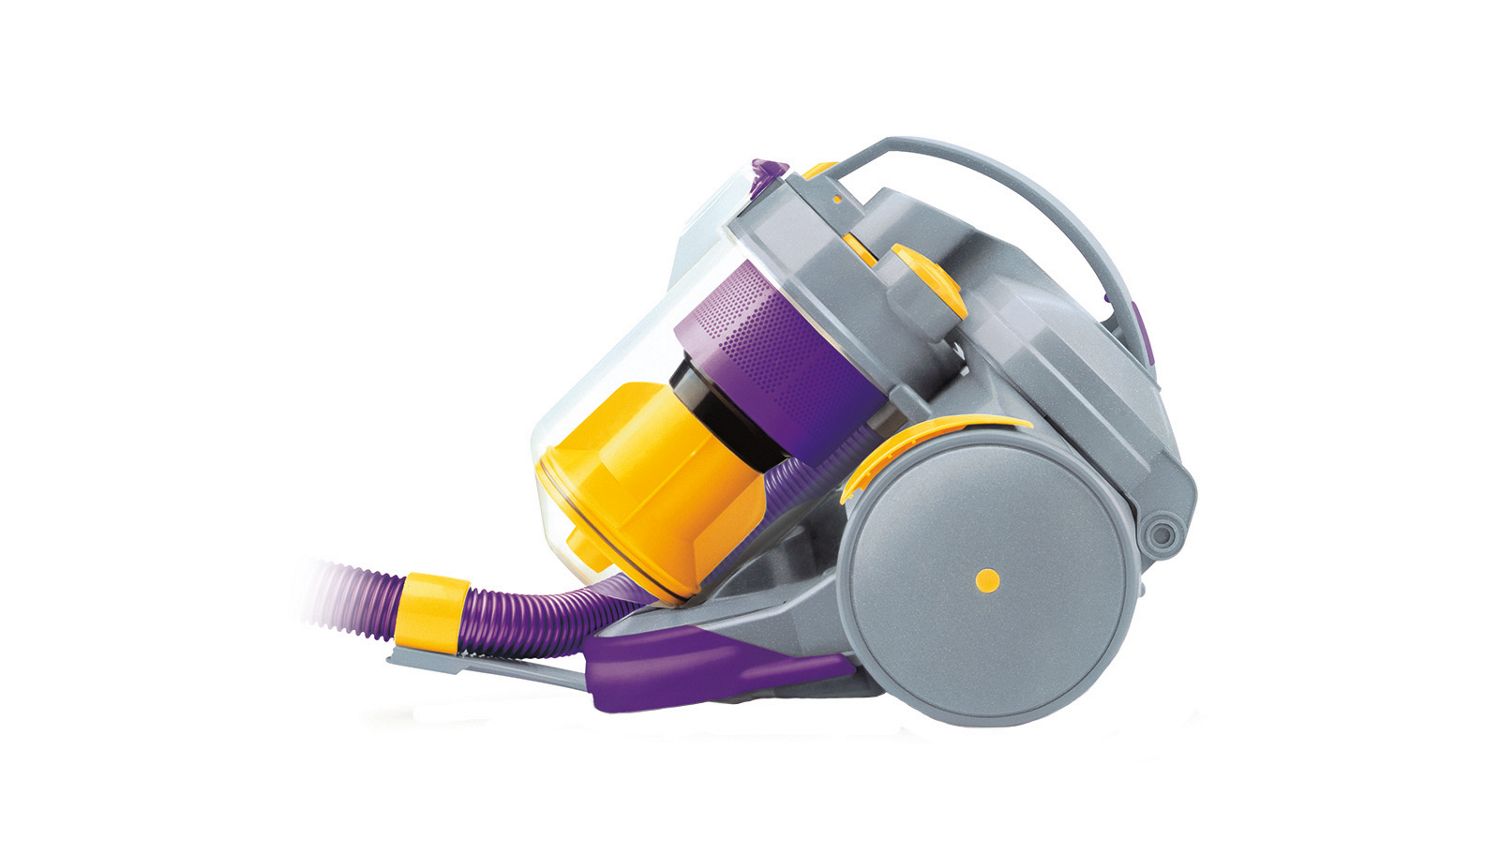 Support | Dyson DC05 cylinder vacuum | Dyson